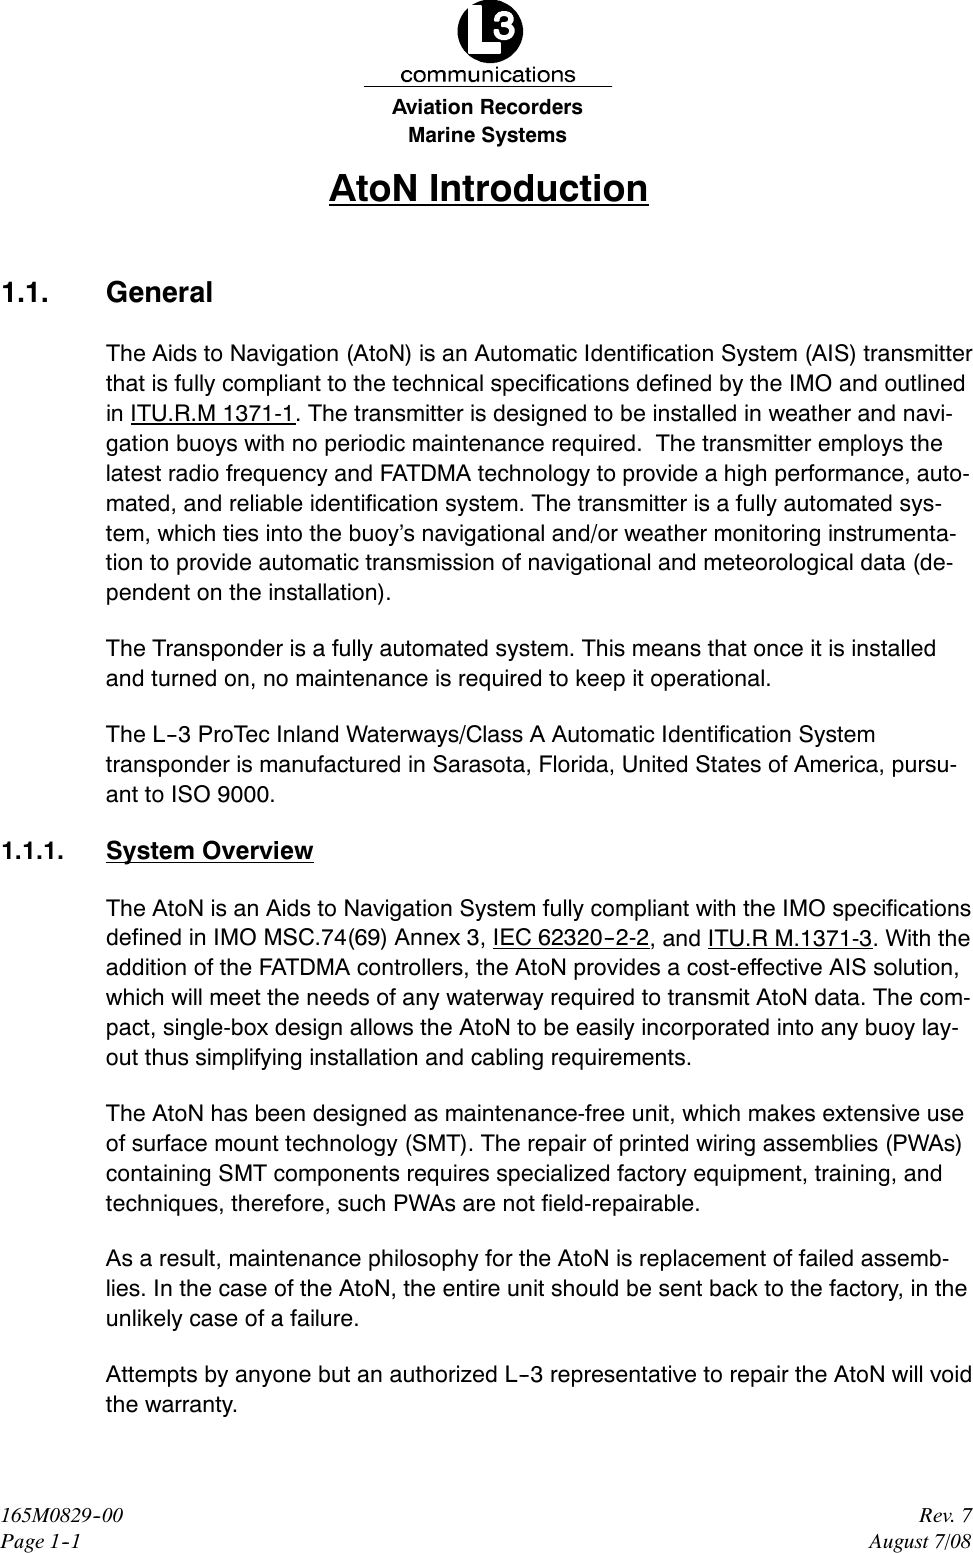 Marine SystemsAviation RecordersRev. 7August 7/08165M0829--00Page 1--1AtoN Introduction1.1. GeneralThe Aids to Navigation (AtoN) is an Automatic Identification System (AIS) transmitterthat is fully compliant to the technical specifications defined by the IMO and outlinedin ITU.R.M 1371-1. The transmitter is designed to be installed in weather and navi-gation buoys with no periodic maintenance required. The transmitter employs thelatest radio frequency and FATDMA technology to provide a high performance, auto-mated, and reliable identification system. The transmitter is a fully automated sys-tem, which ties into the buoy’s navigational and/or weather monitoring instrumenta-tion to provide automatic transmission of navigational and meteorological data (de-pendent on the installation).The Transponder is a fully automated system. This means that once it is installedand turned on, no maintenance is required to keep it operational.The L--3 ProTec Inland Waterways/Class A Automatic Identification Systemtransponder is manufactured in Sarasota, Florida, United States of America, pursu-ant to ISO 9000.1.1.1. System OverviewThe AtoN is an Aids to Navigation System fully compliant with the IMO specificationsdefined in IMO MSC.74(69) Annex 3, IEC 62320--2-2, and ITU.R M.1371-3.Withtheaddition of the FATDMA controllers, the AtoN provides a cost-effective AIS solution,which will meet the needs of any waterway required to transmit AtoN data. The com-pact, single-box design allows the AtoN to be easily incorporated into any buoy lay-out thus simplifying installation and cabling requirements.The AtoN has been designed as maintenance-free unit, which makes extensive useof surface mount technology (SMT). The repair of printed wiring assemblies (PWAs)containing SMT components requires specialized factory equipment, training, andtechniques, therefore, such PWAs are not field-repairable.As a result, maintenance philosophy for the AtoN is replacement of failed assemb-lies. In the case of the AtoN, the entire unit should be sent back to the factory, in theunlikely case of a failure.Attempts by anyone but an authorized L--3 representative to repair the AtoN will voidthe warranty.